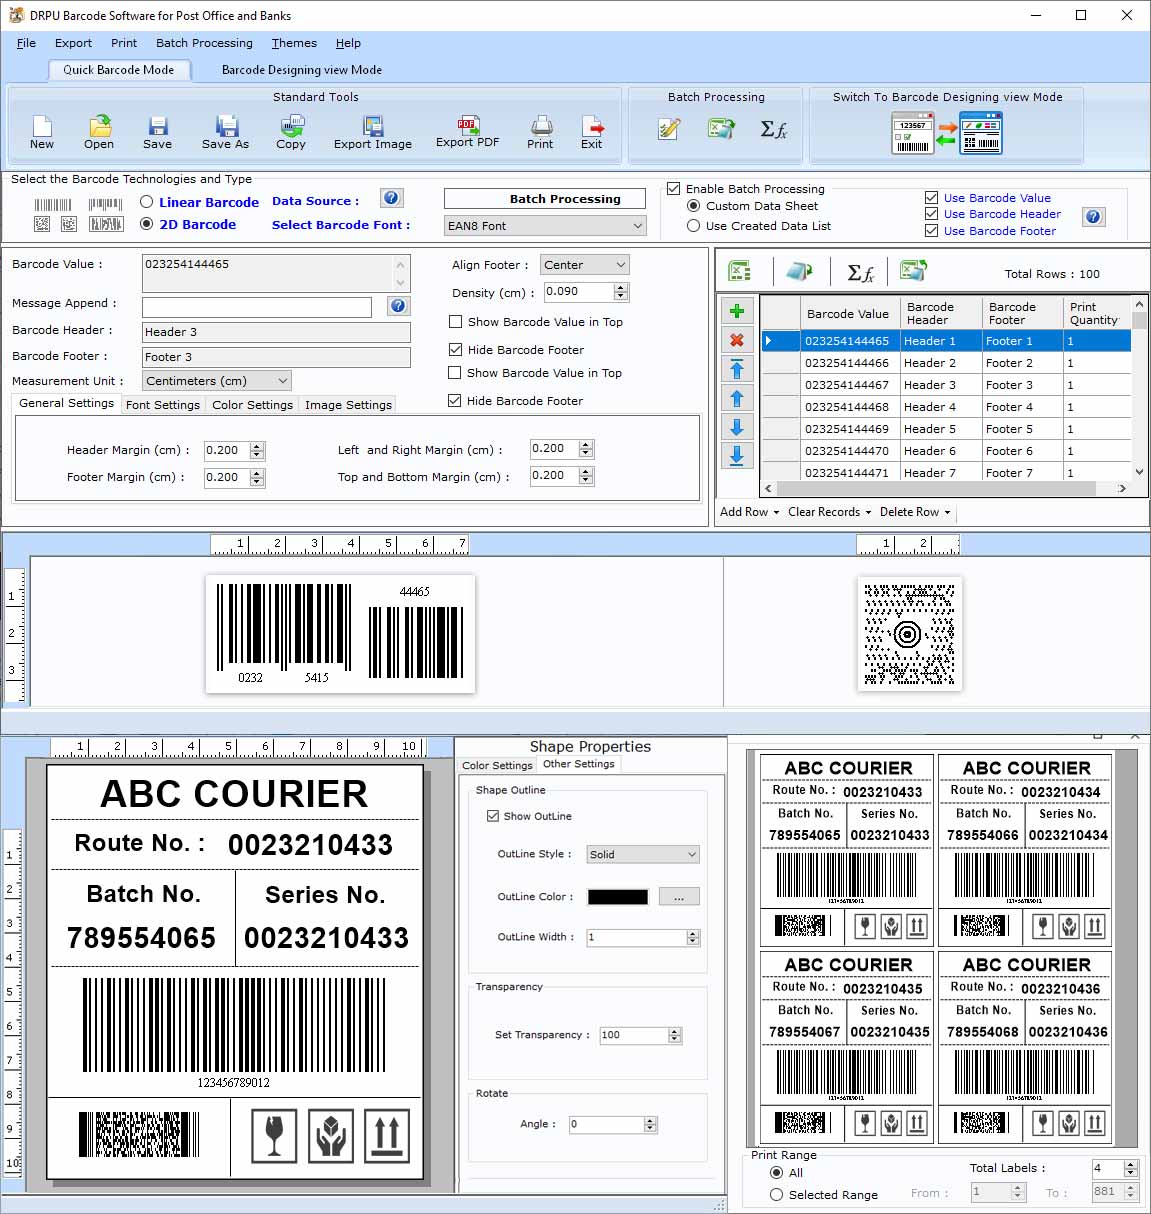 Barcode Inventory System 7.3.0.1